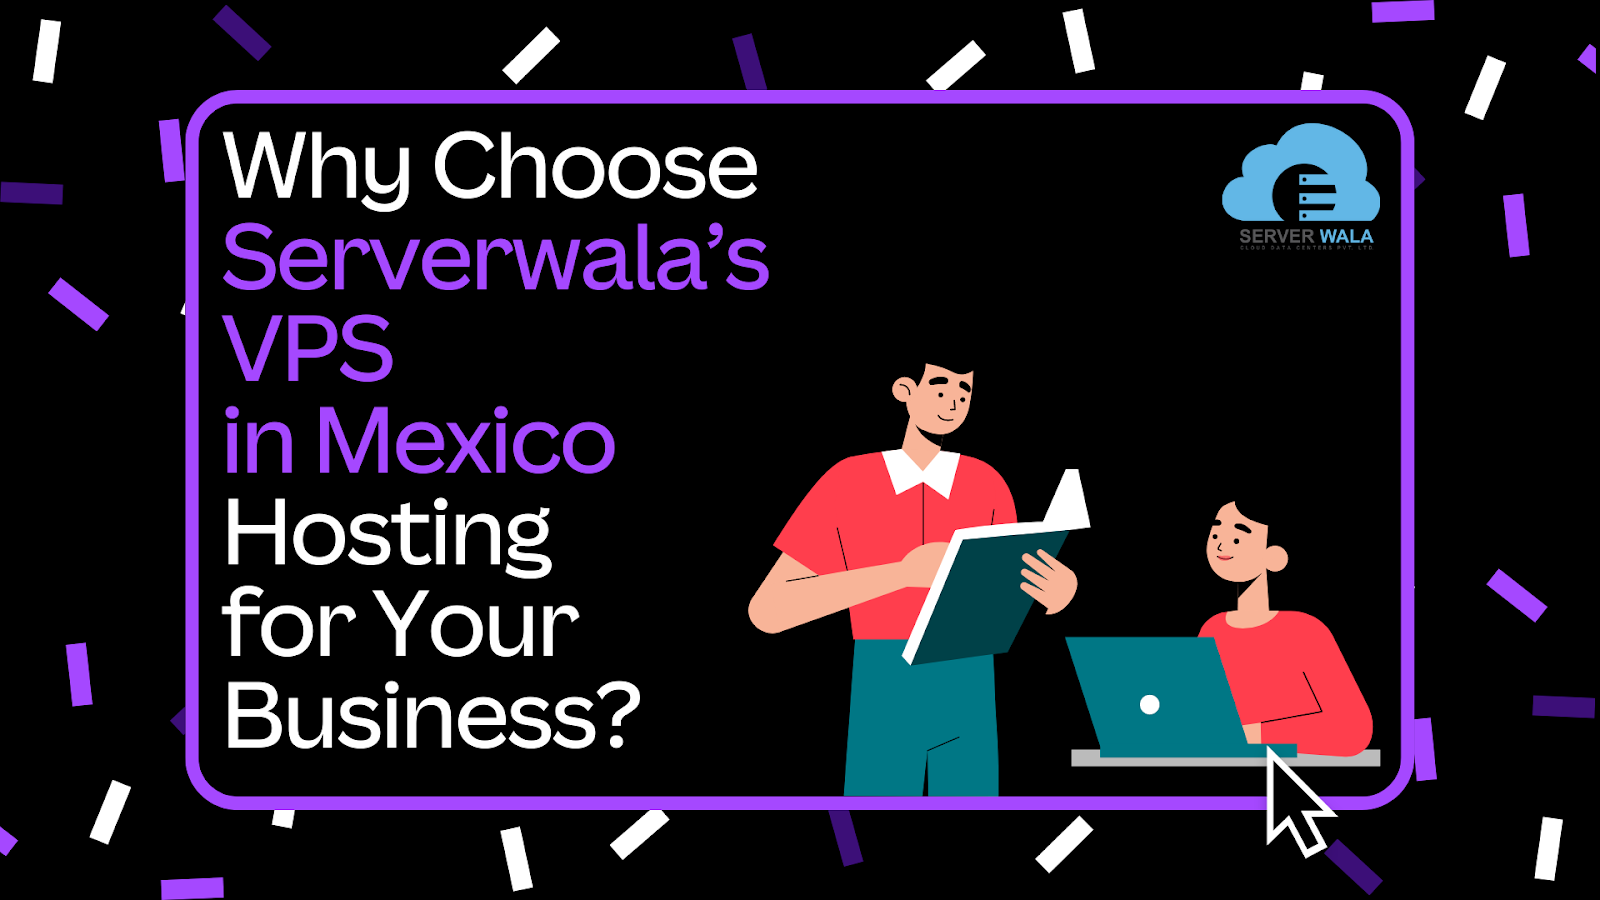 Why Choose Serverwala’s VPS in Mexico Hosting for Your Business?